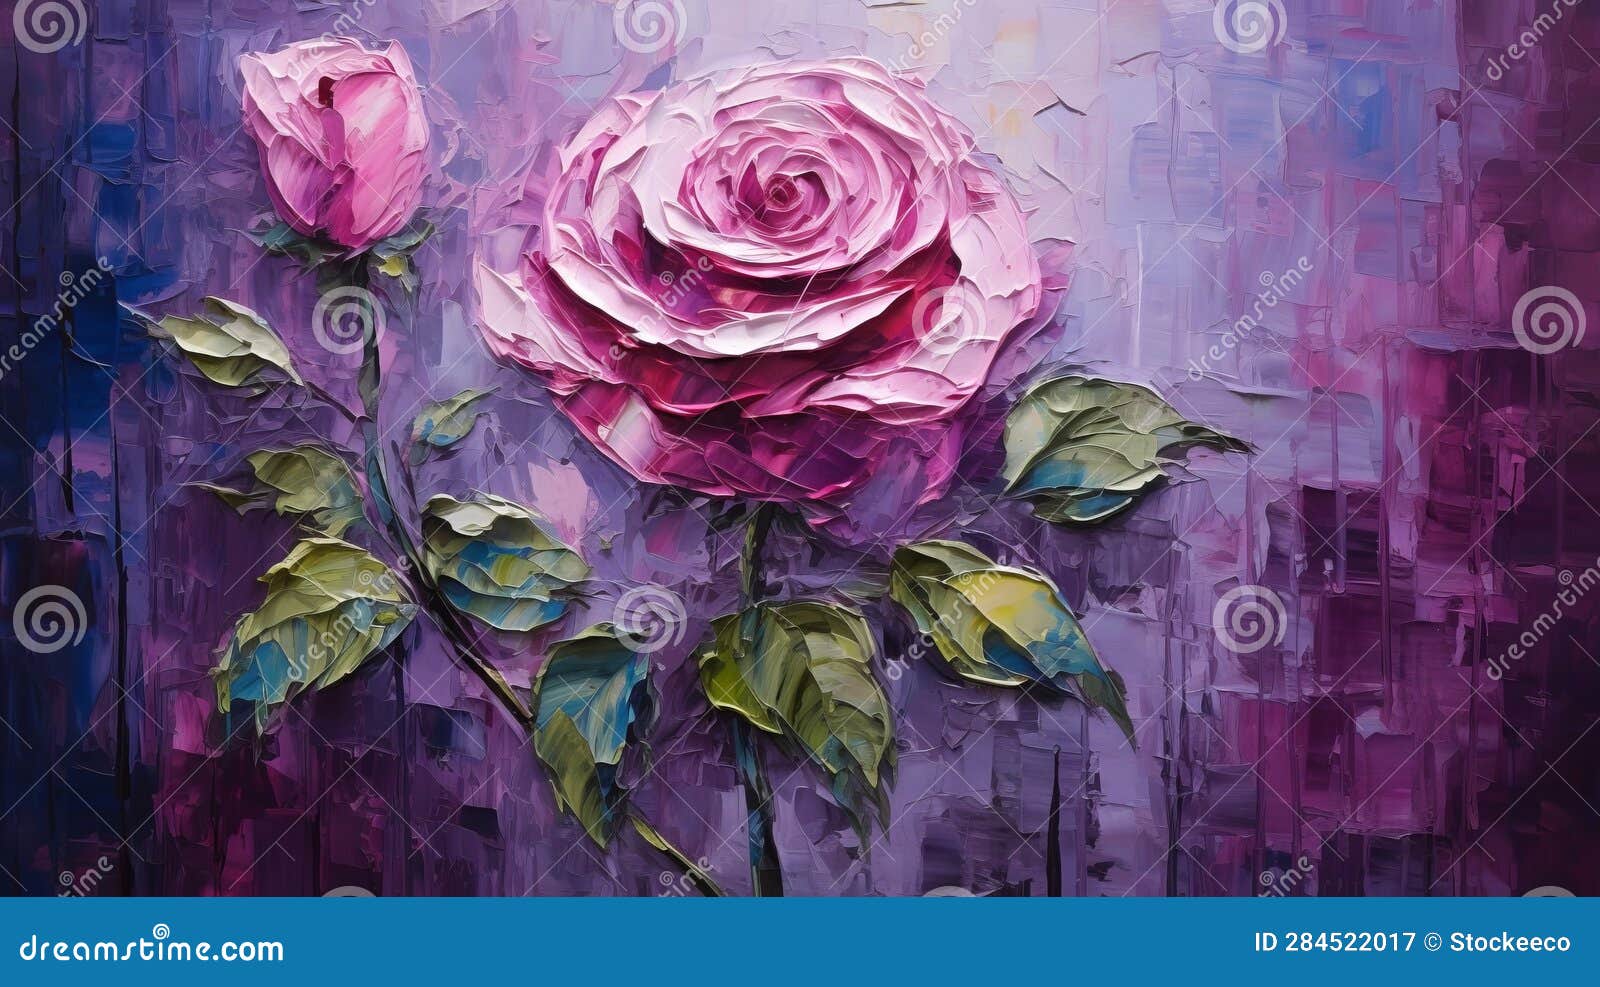 stunning rose art: vibrant palette knife painting with romantic emotion